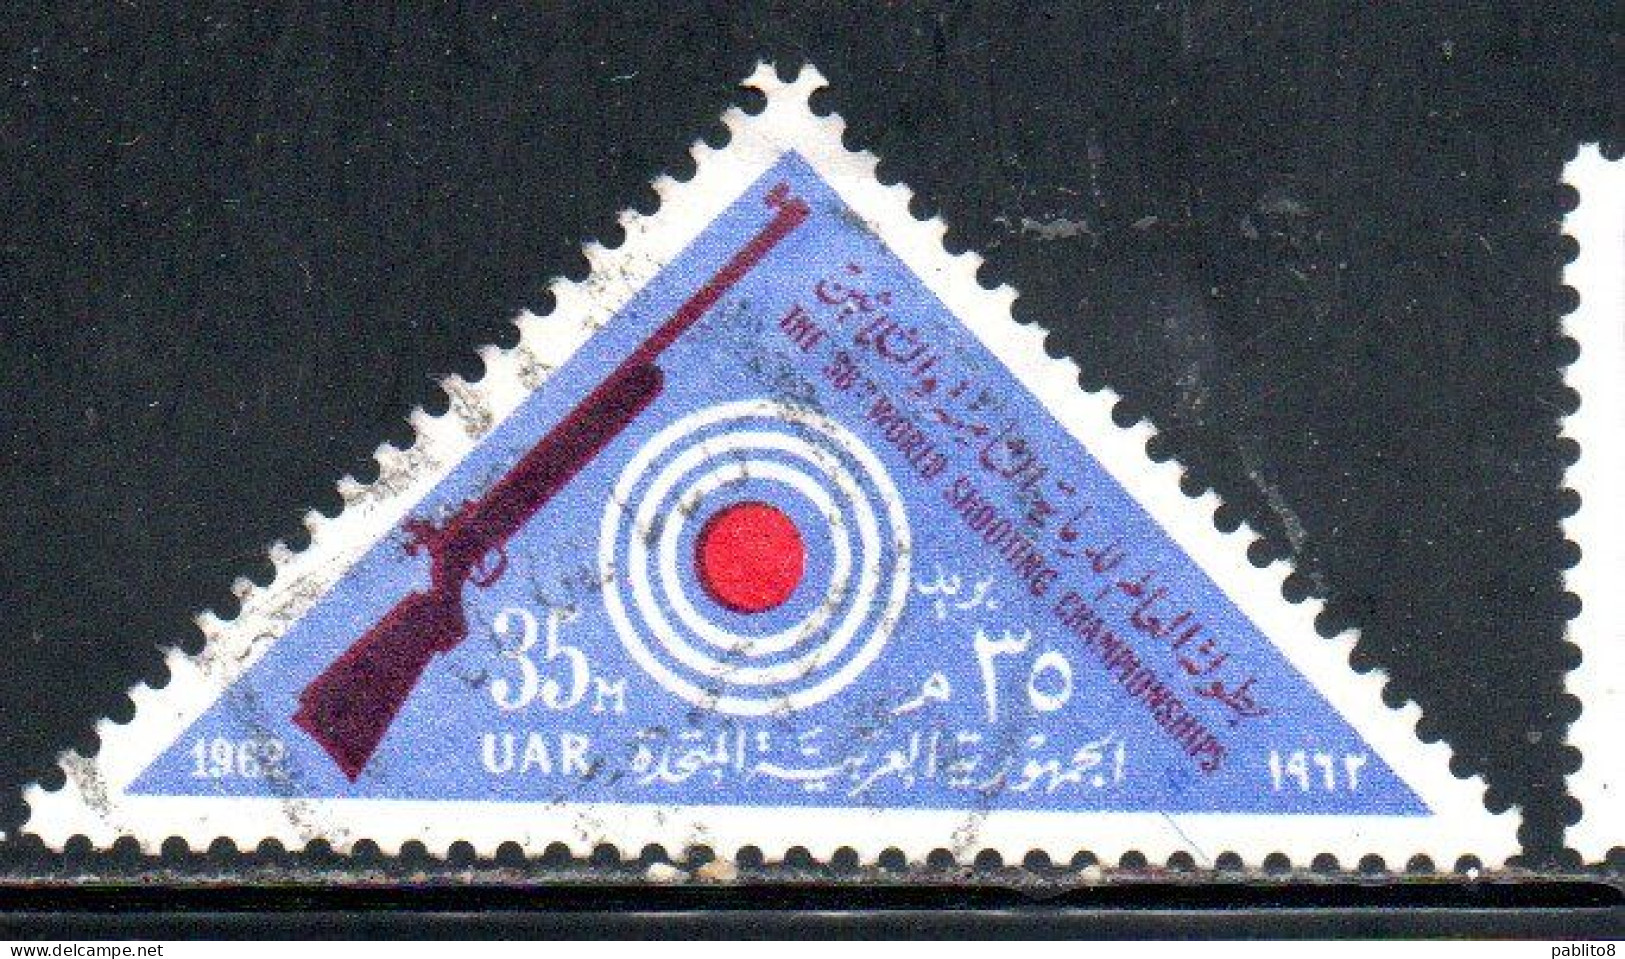 UAR EGYPT EGITTO 1962 WORLD SHOOTING CHAMPIONSHIPS AND AFRICAN TABLE TENNIS TOURNAMENTE RIFLE AND TARGET 35m USED USATO - Used Stamps